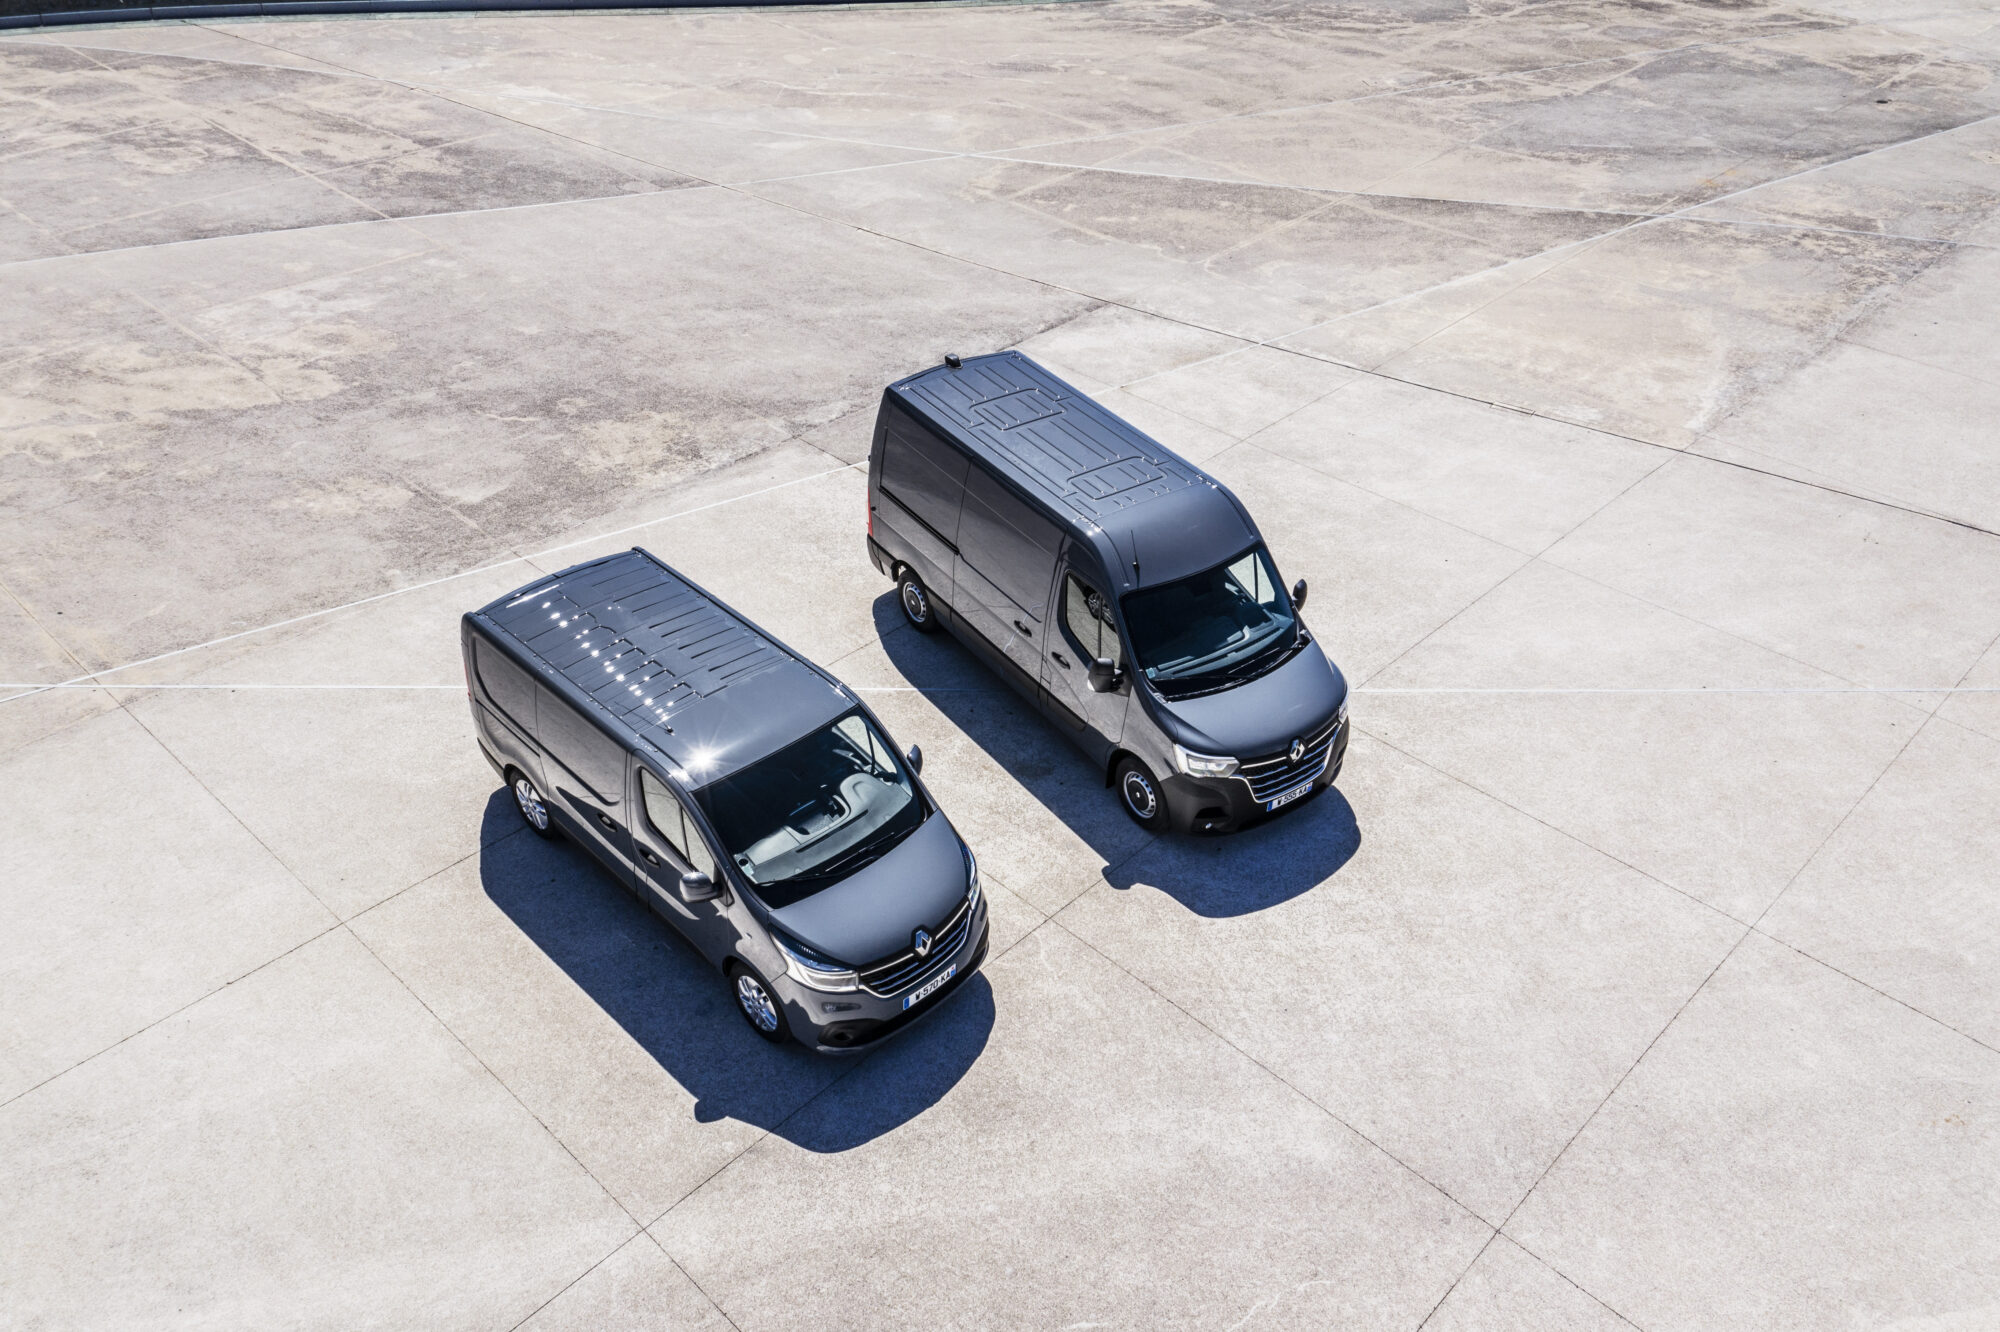 2019 - New Renault MASTER and New Renault TRAFIC press tests in Portugal